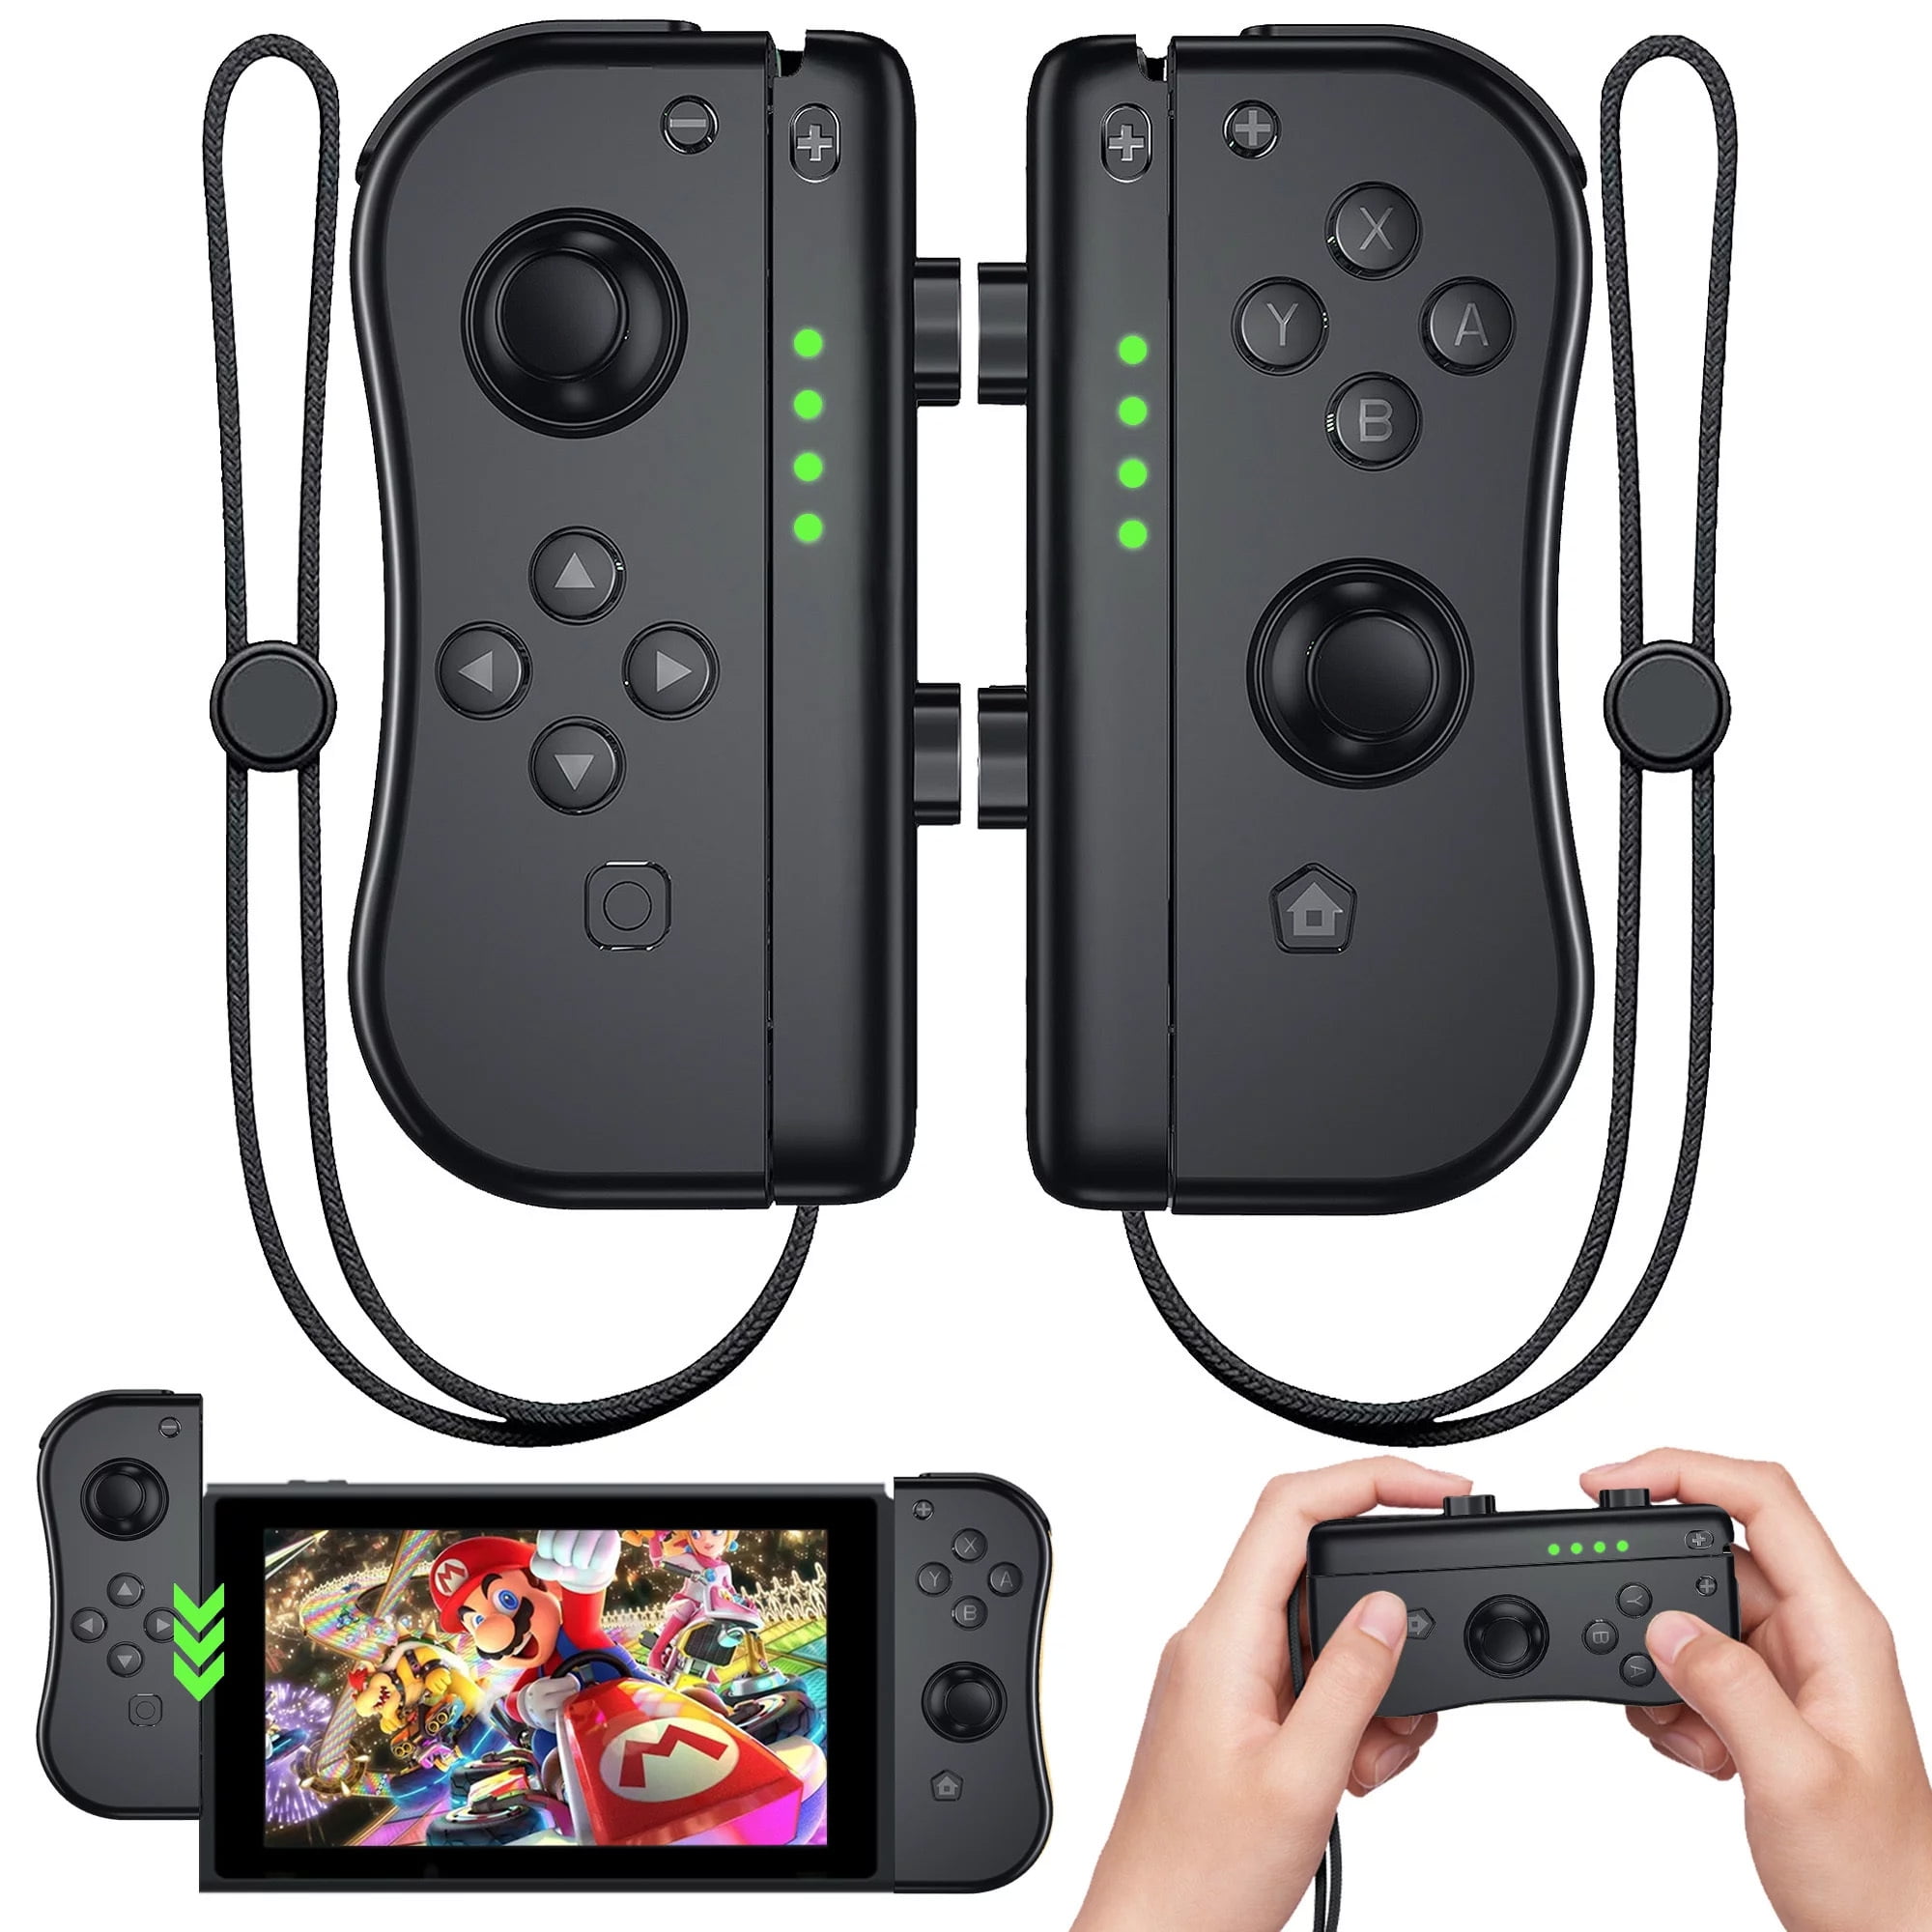 News - Nintendo Switch Joy-Con Controllers Are PC Compatible Out of the Box